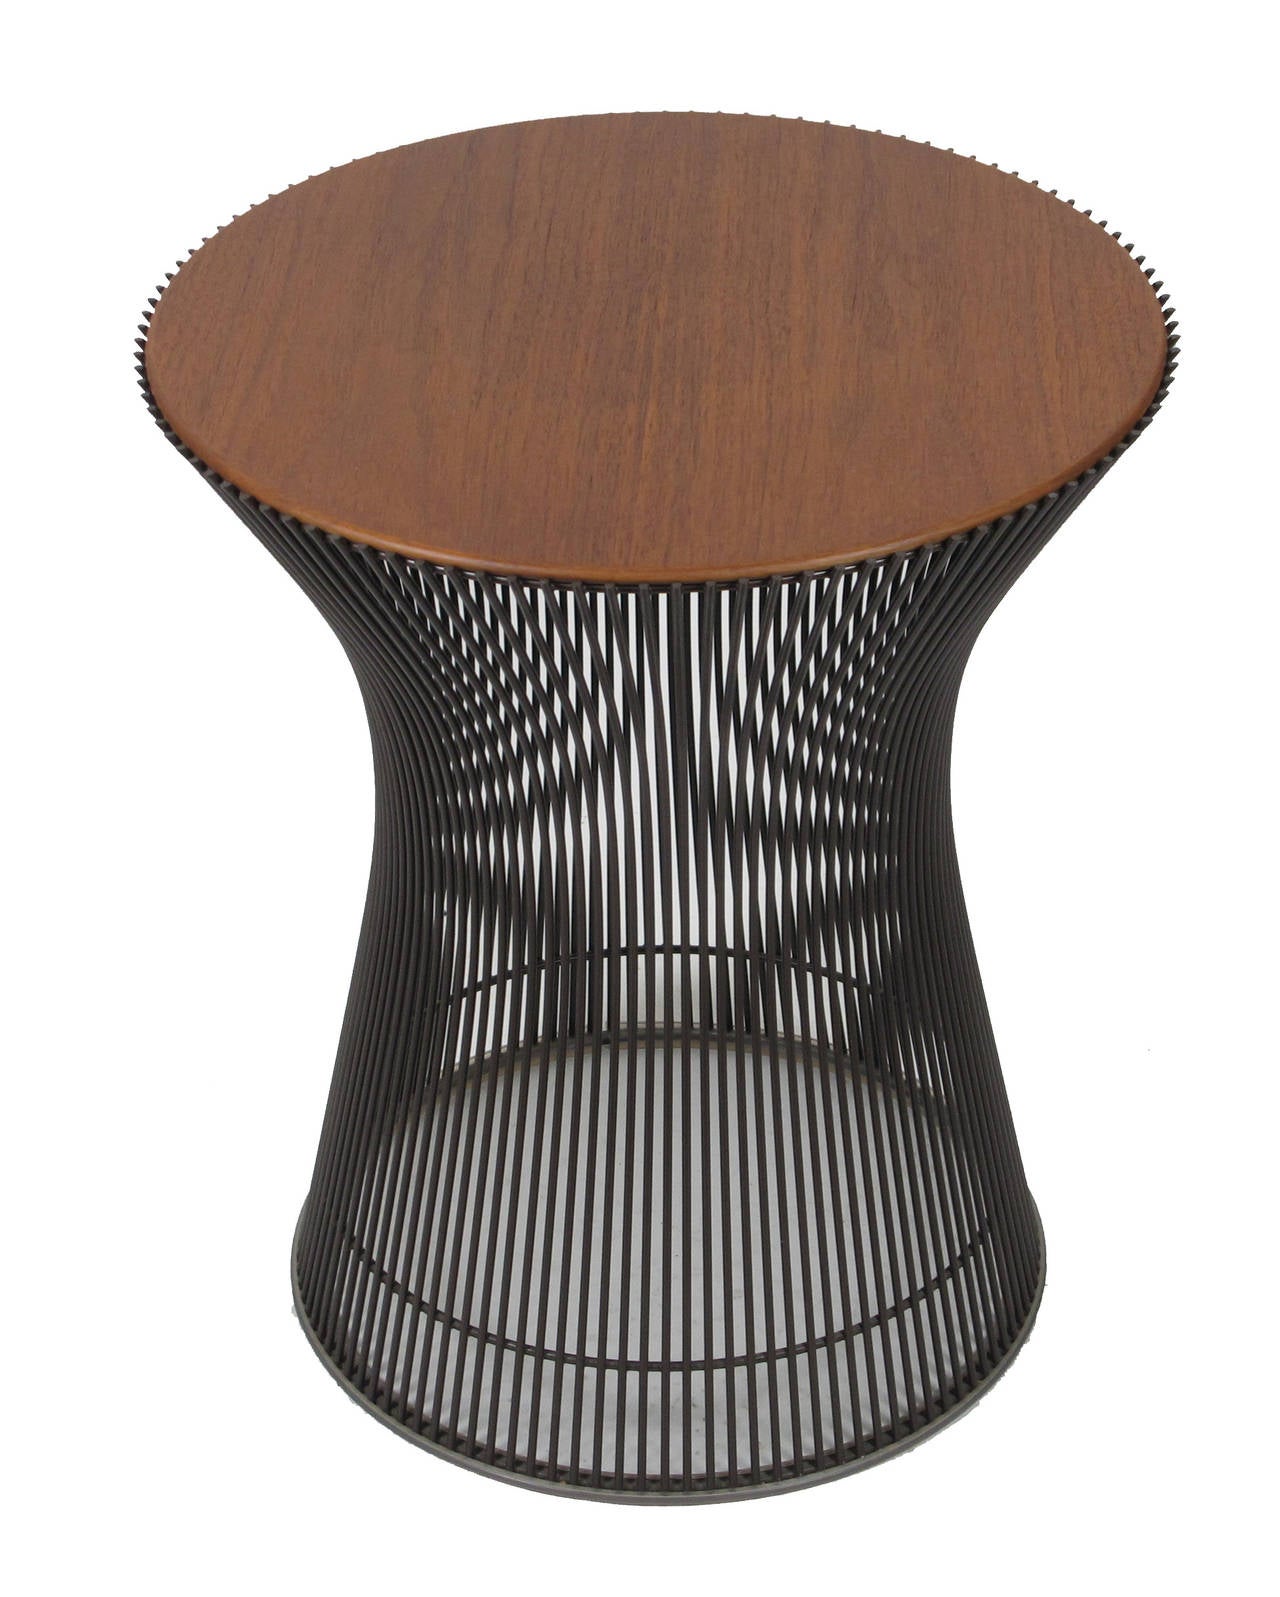 Iconic sculptural side table in the bronze powder-coat finish with nicely grained walnut veneered top. Retains original plastic floor guard (extrusion ring) and Knoll Park Avenue paper label (stamped 1975) on underside on the 16 inch wood top.